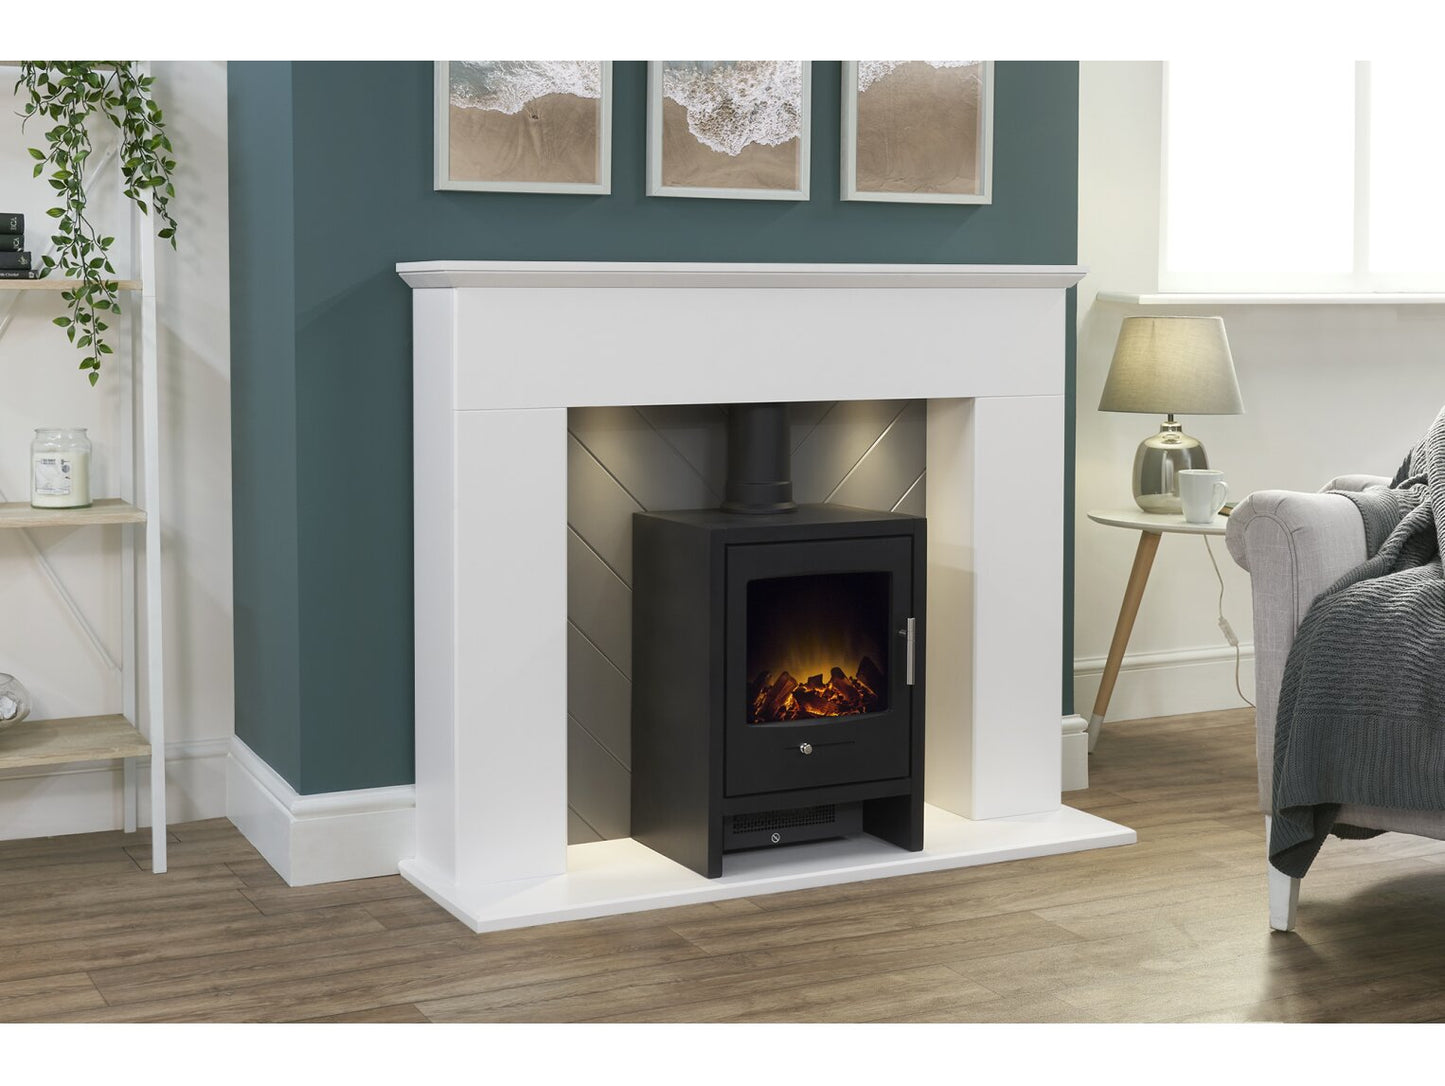 Adam Corinth Stove Fireplace with Downlights & Bergen Electric Stove in Charcoal Grey, 48 Inch 25448 Pure White & Grey